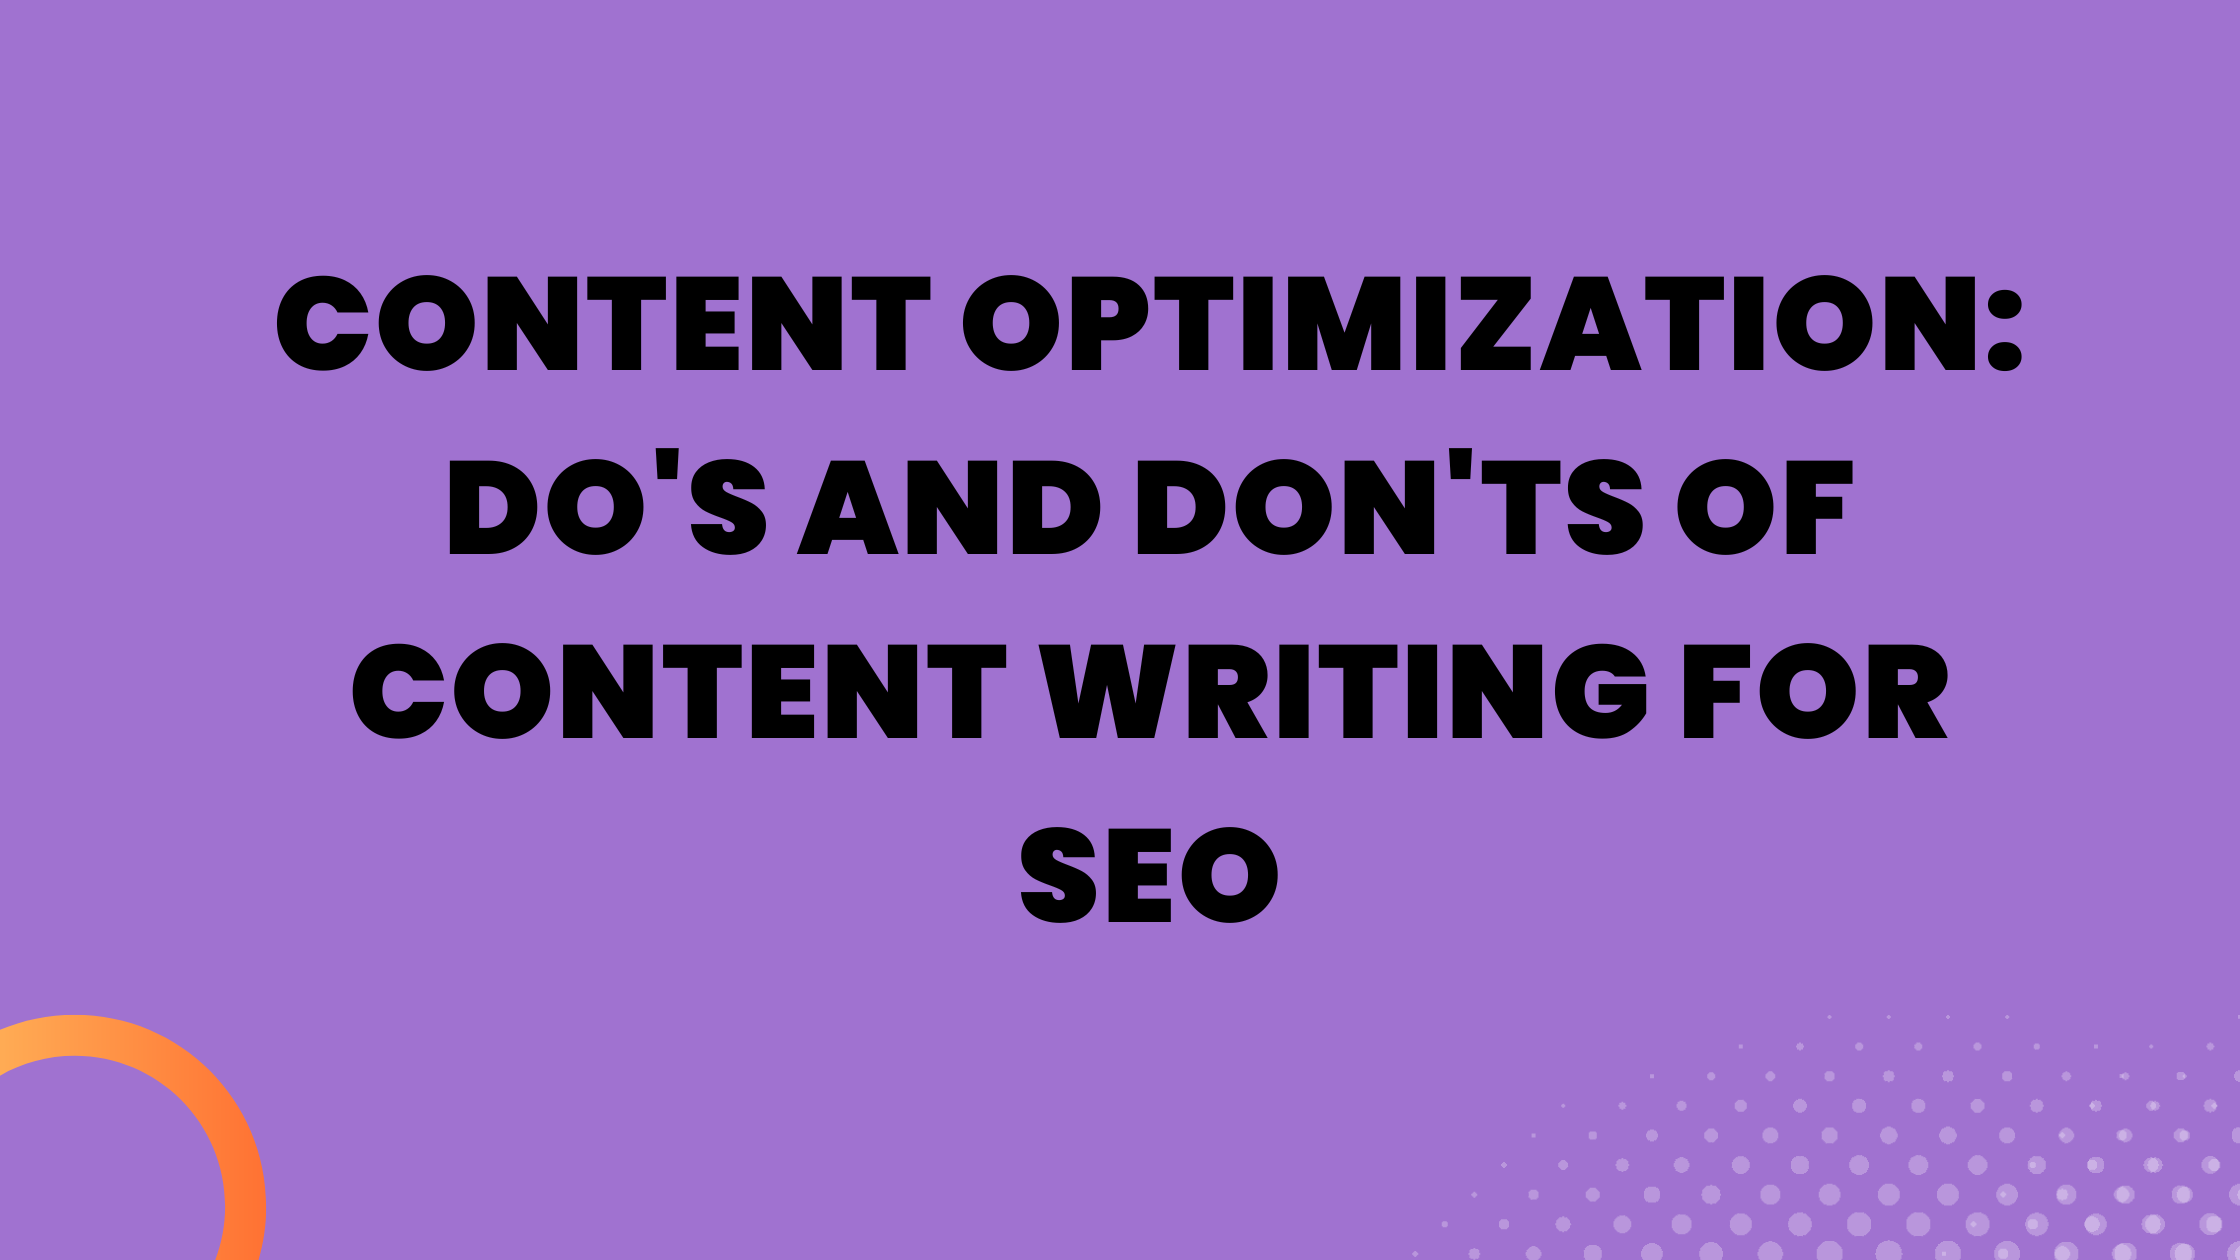 Content Optimization: Do’s and Don’ts of Content Writing for SEO